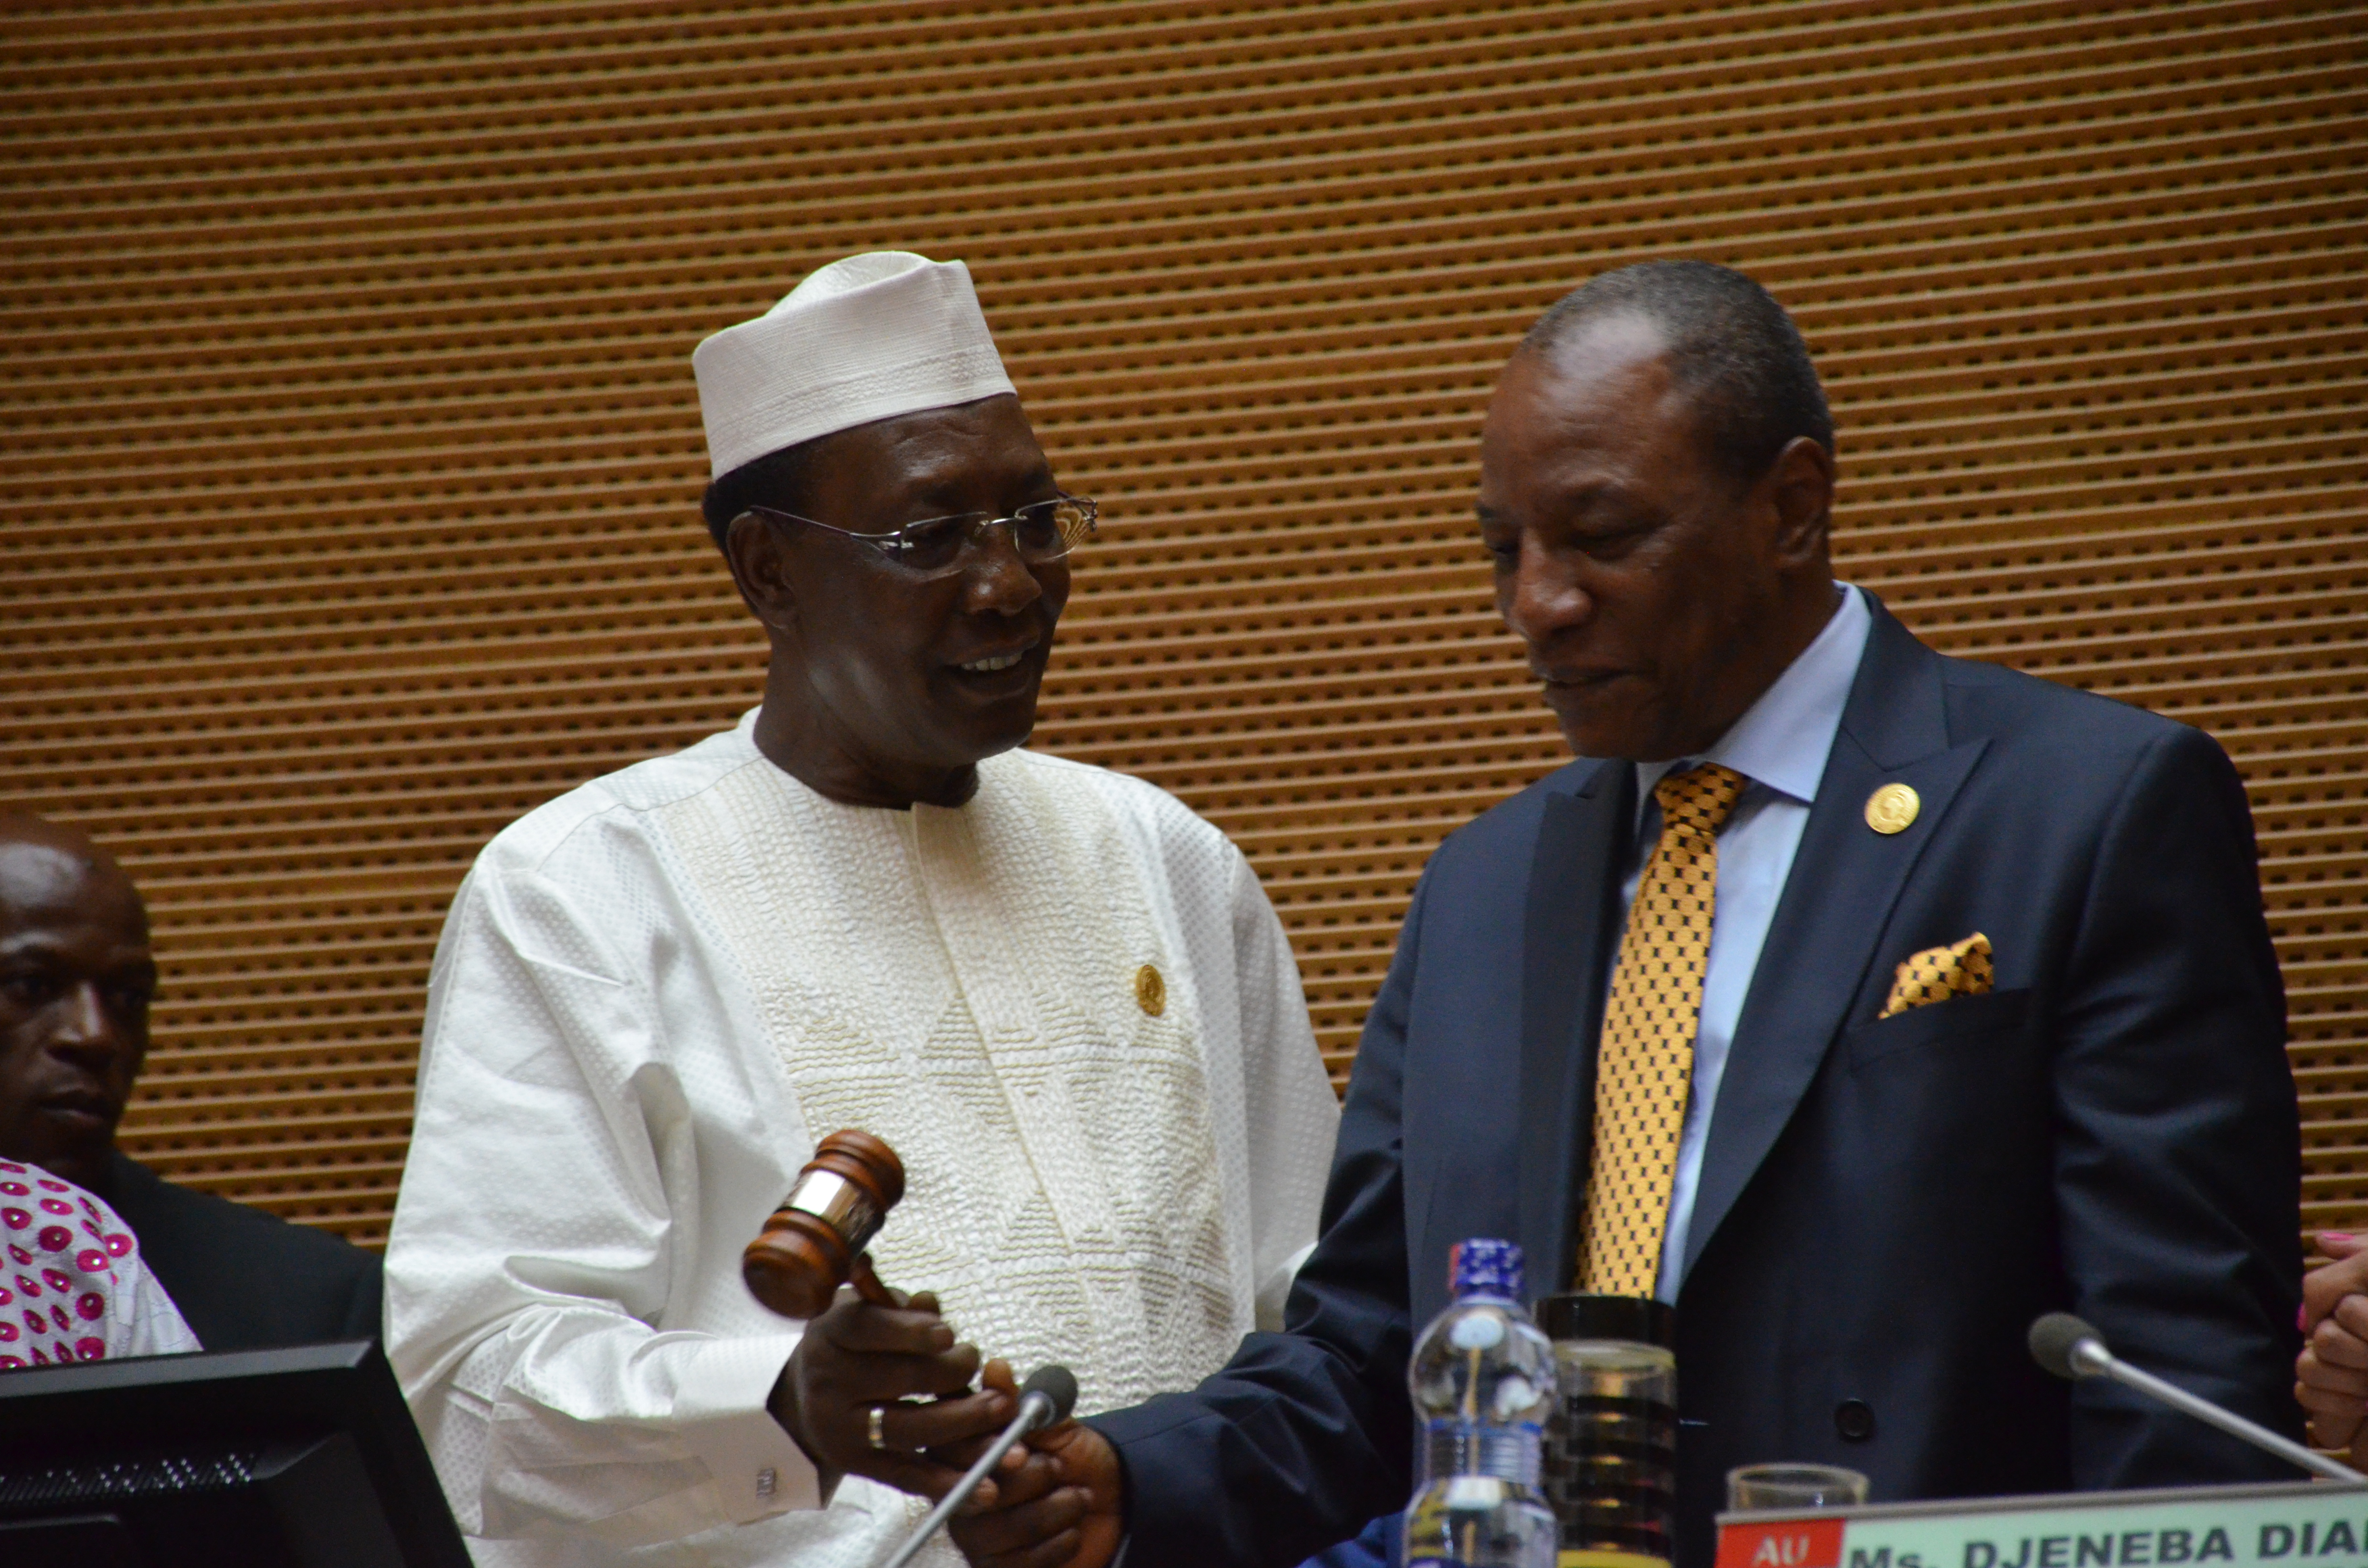 President Conde receiving the instrument of office as AU Chairperson from President Idris Derby